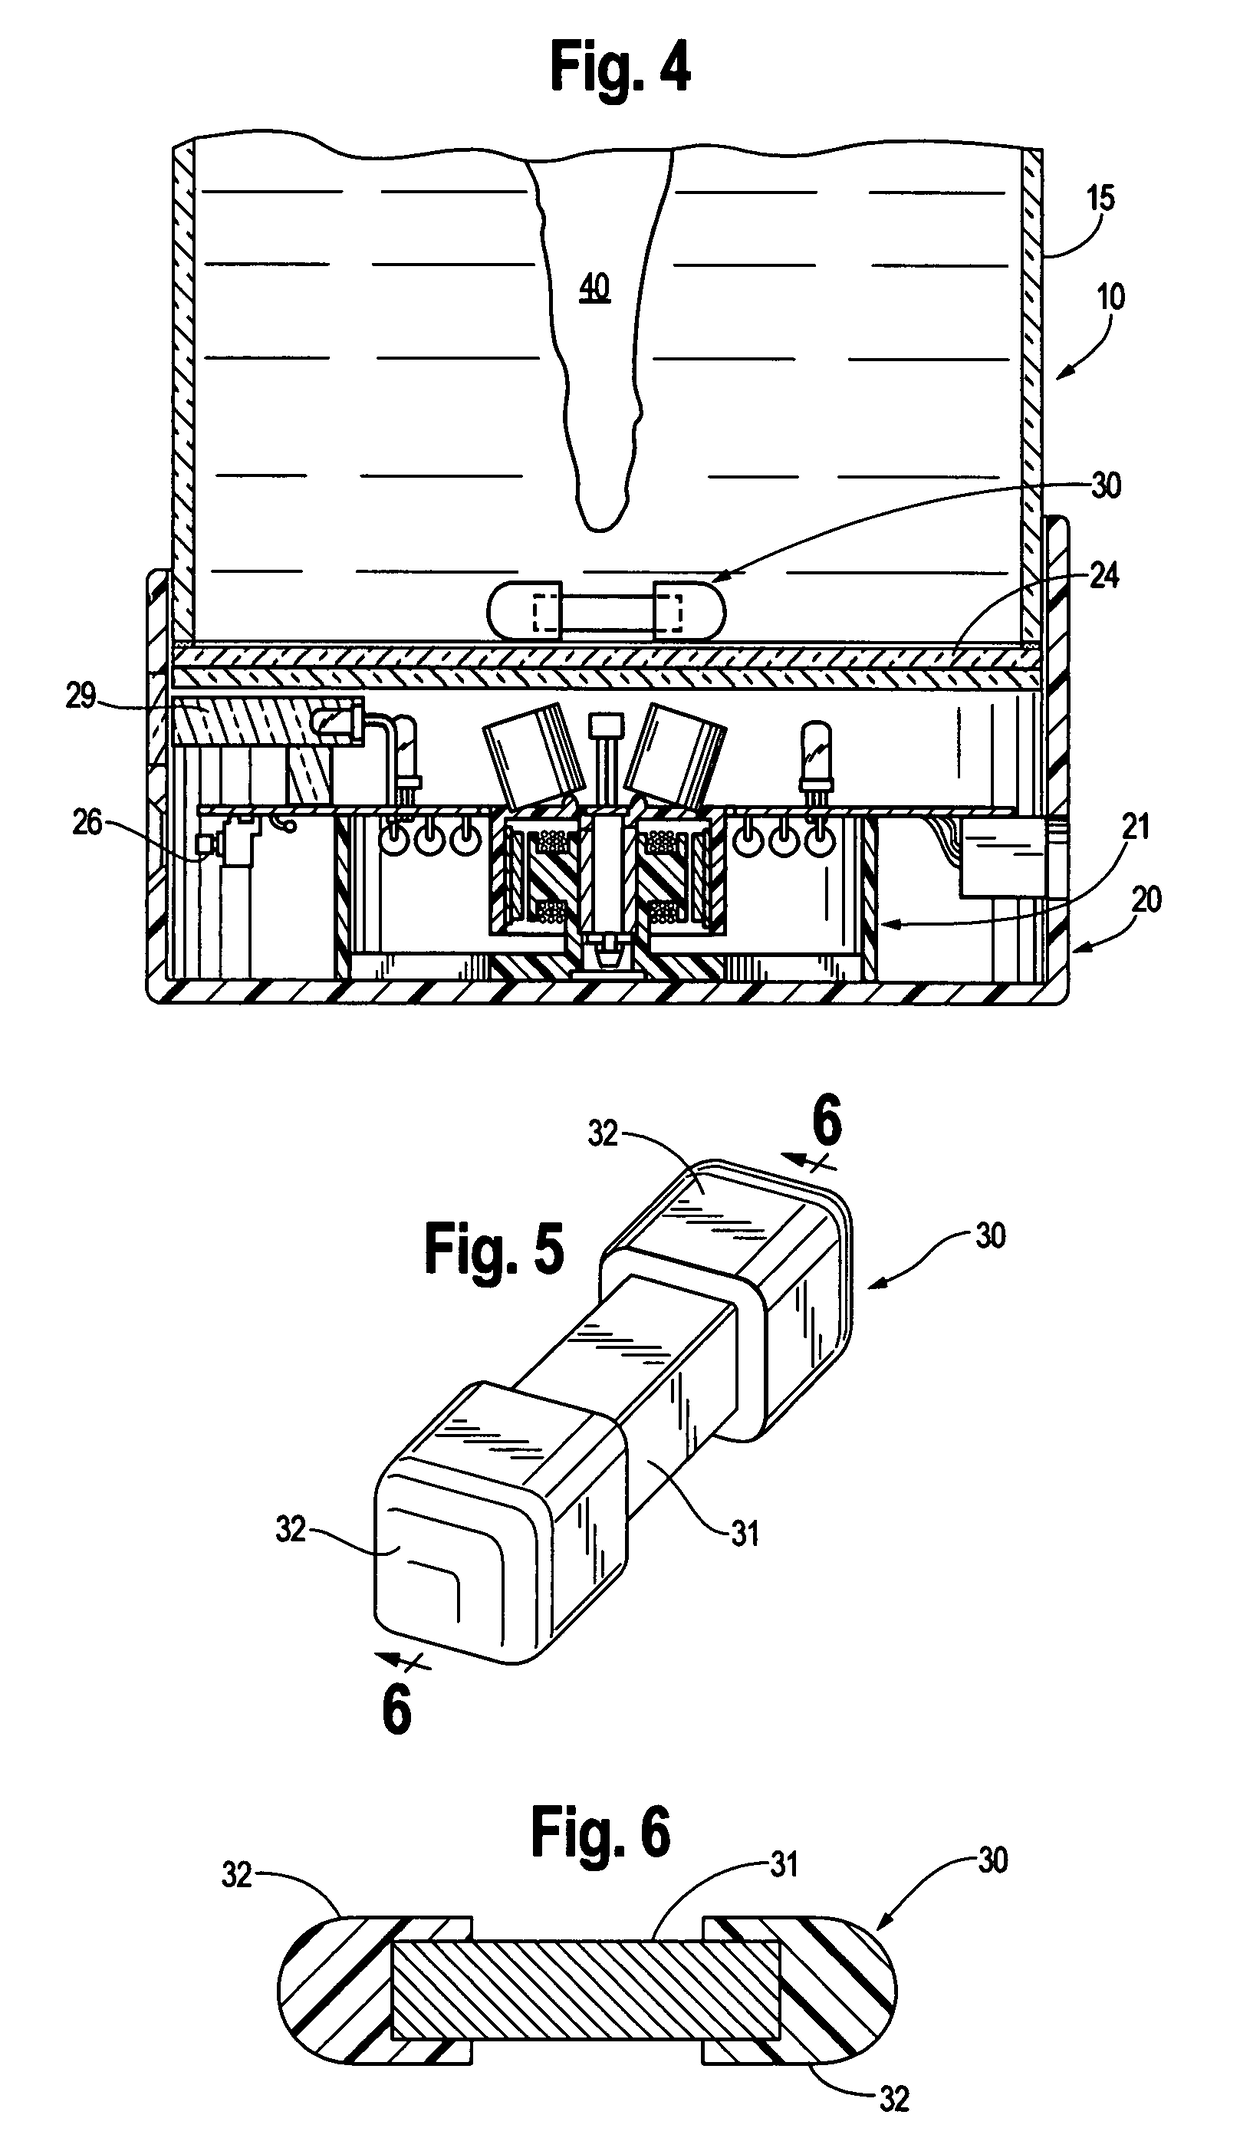 Device and method for generating vortex